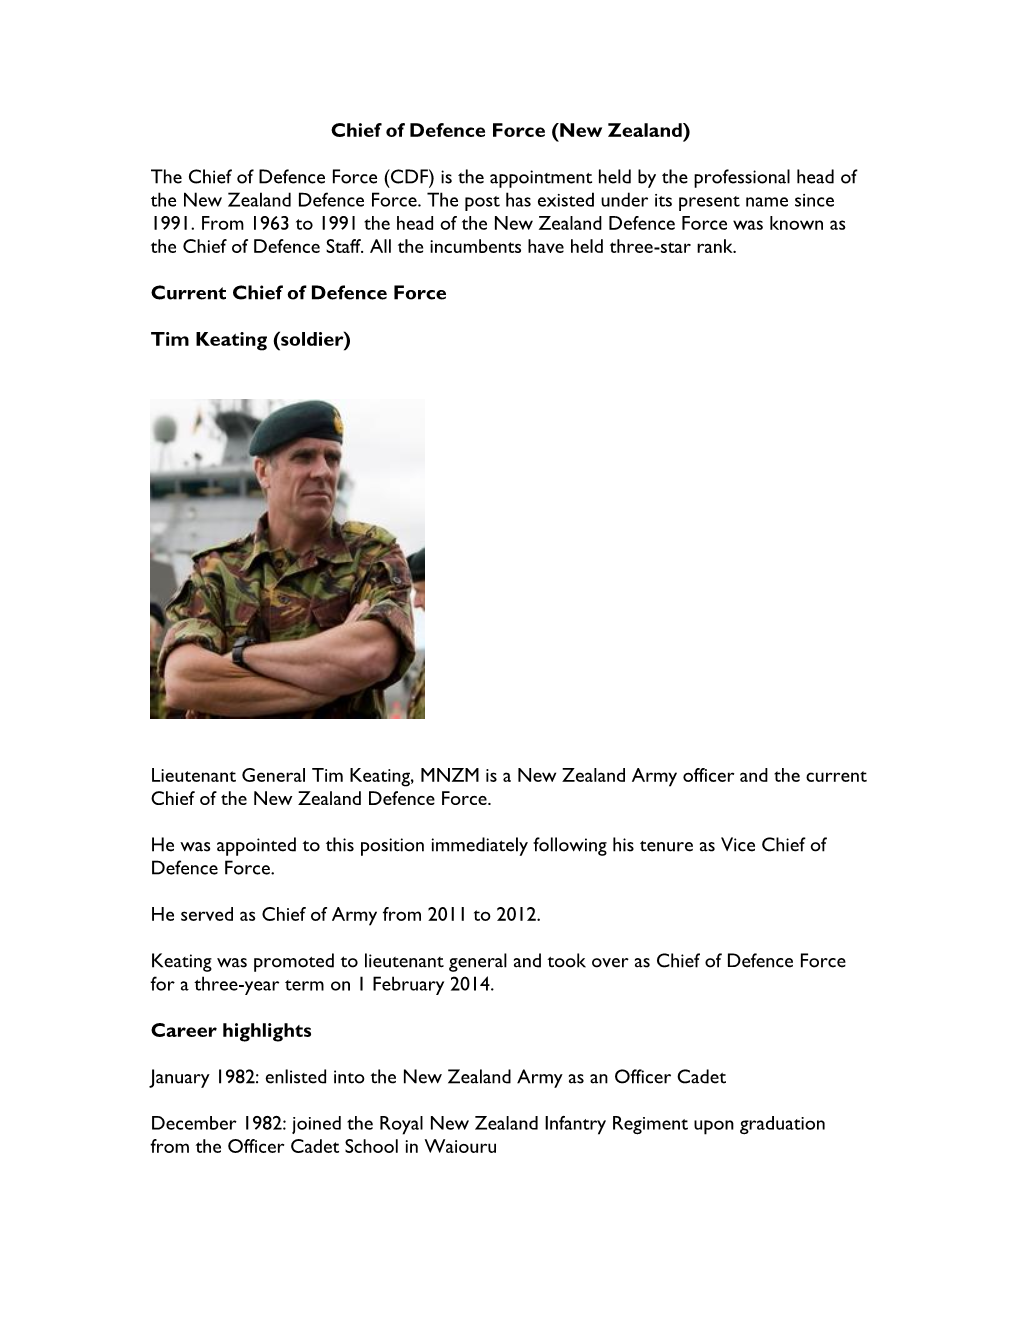 New Zealand) the Chief of Defence Force (CDF